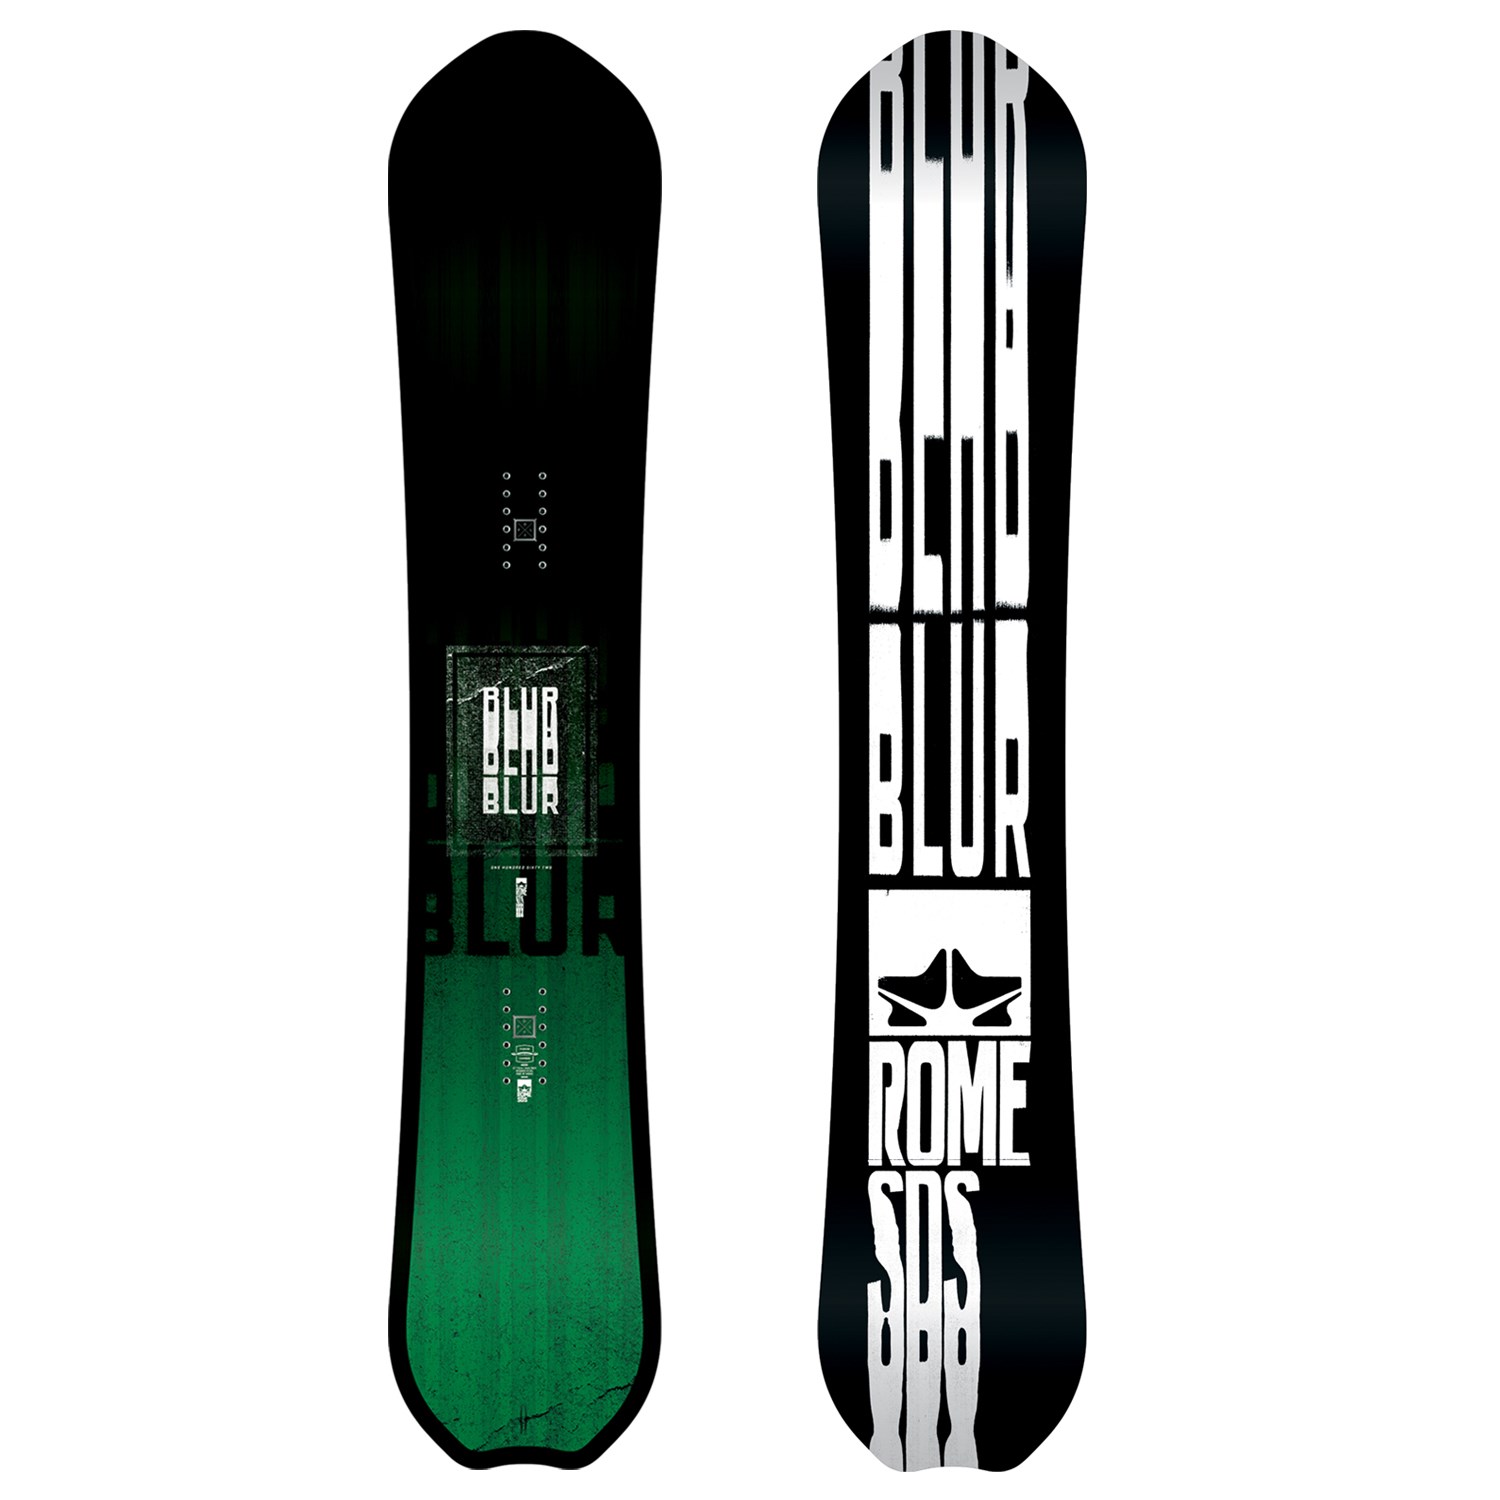 Rome Blur Snowboard 2018 Evo for How To Measure Snowboard